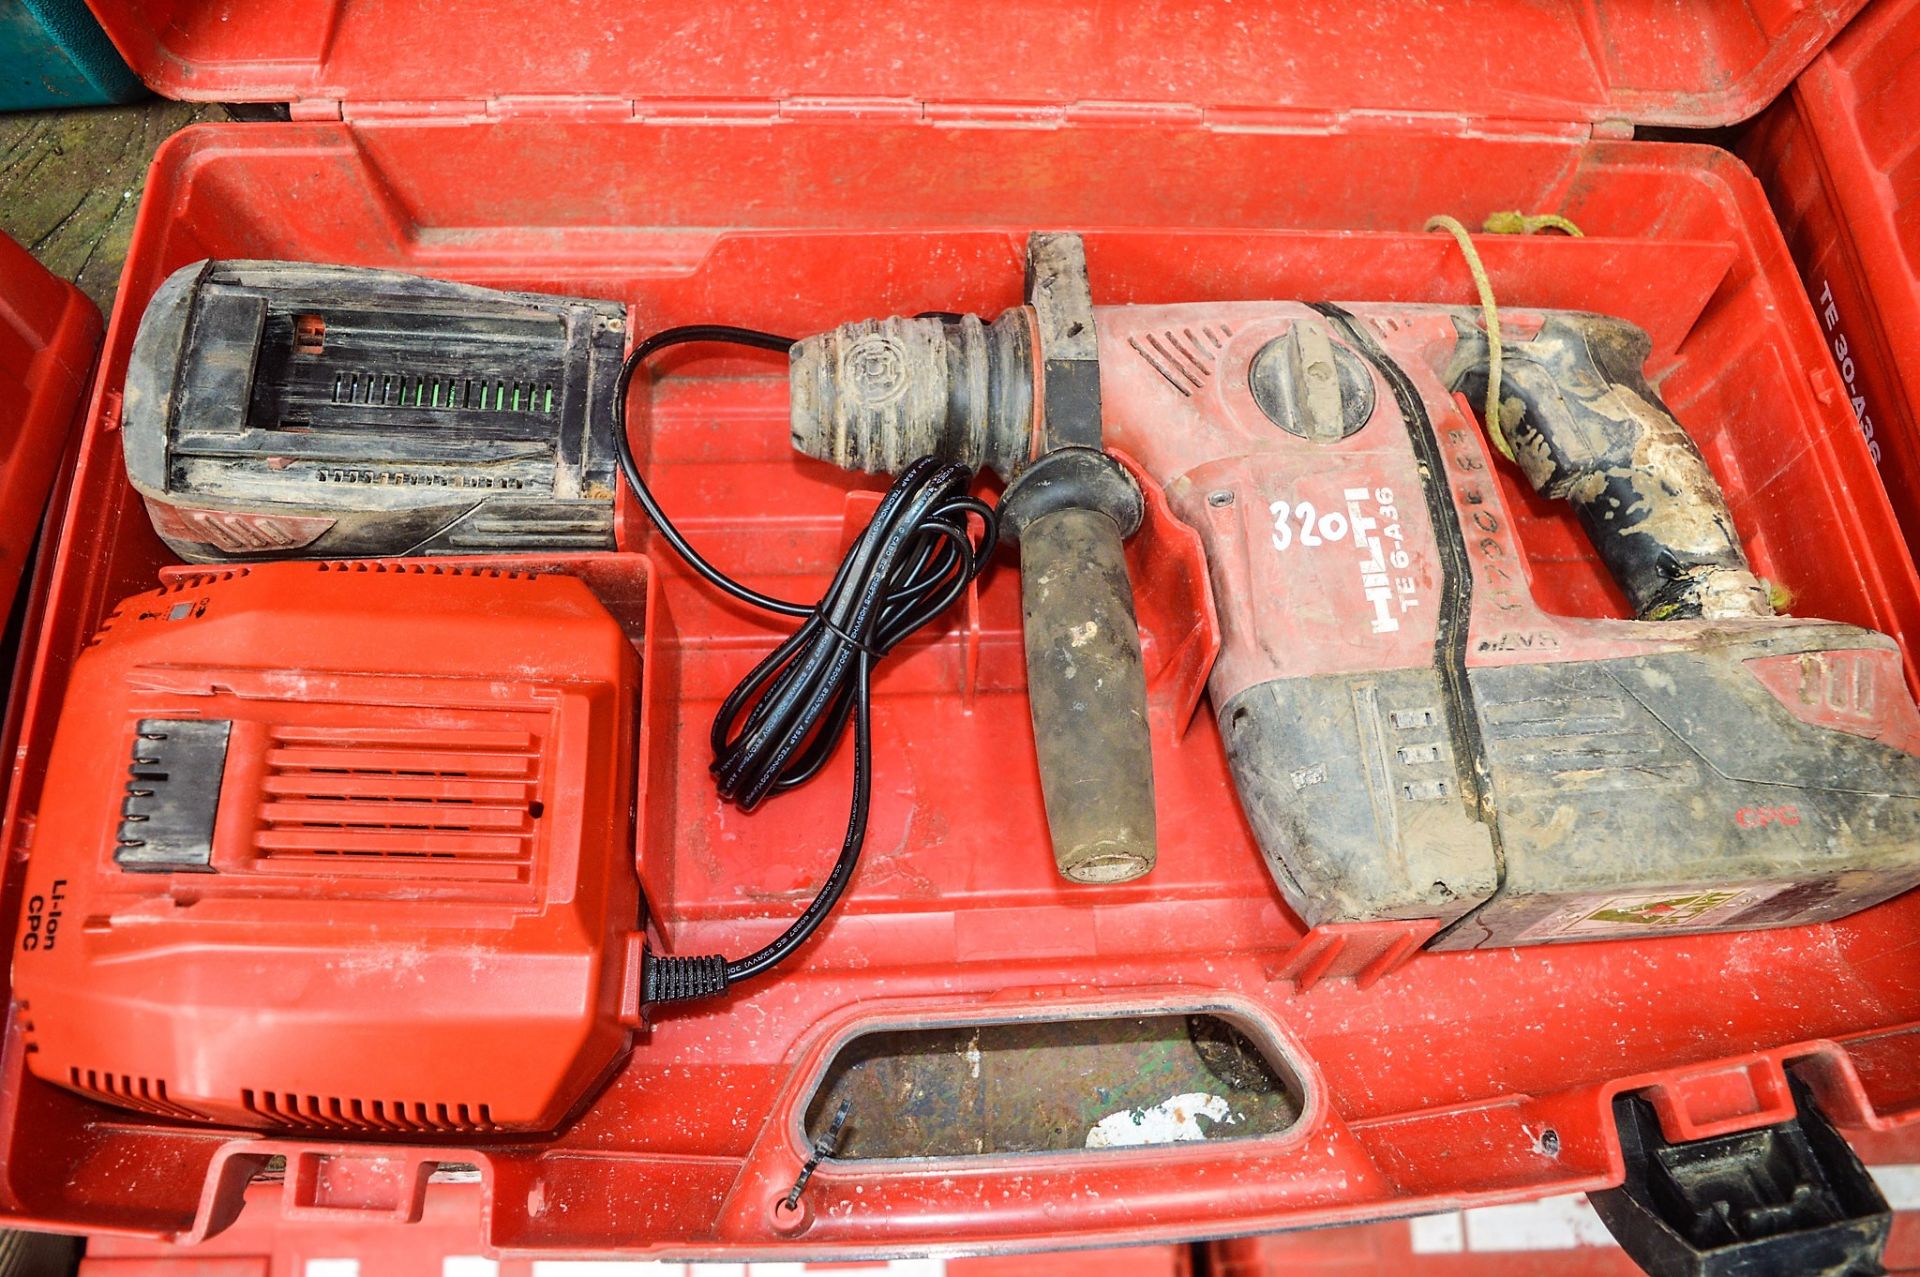 Hilti TE6-A 36v SDS rotary hammer drill c/w charger, 2 batteries & carry case A700583